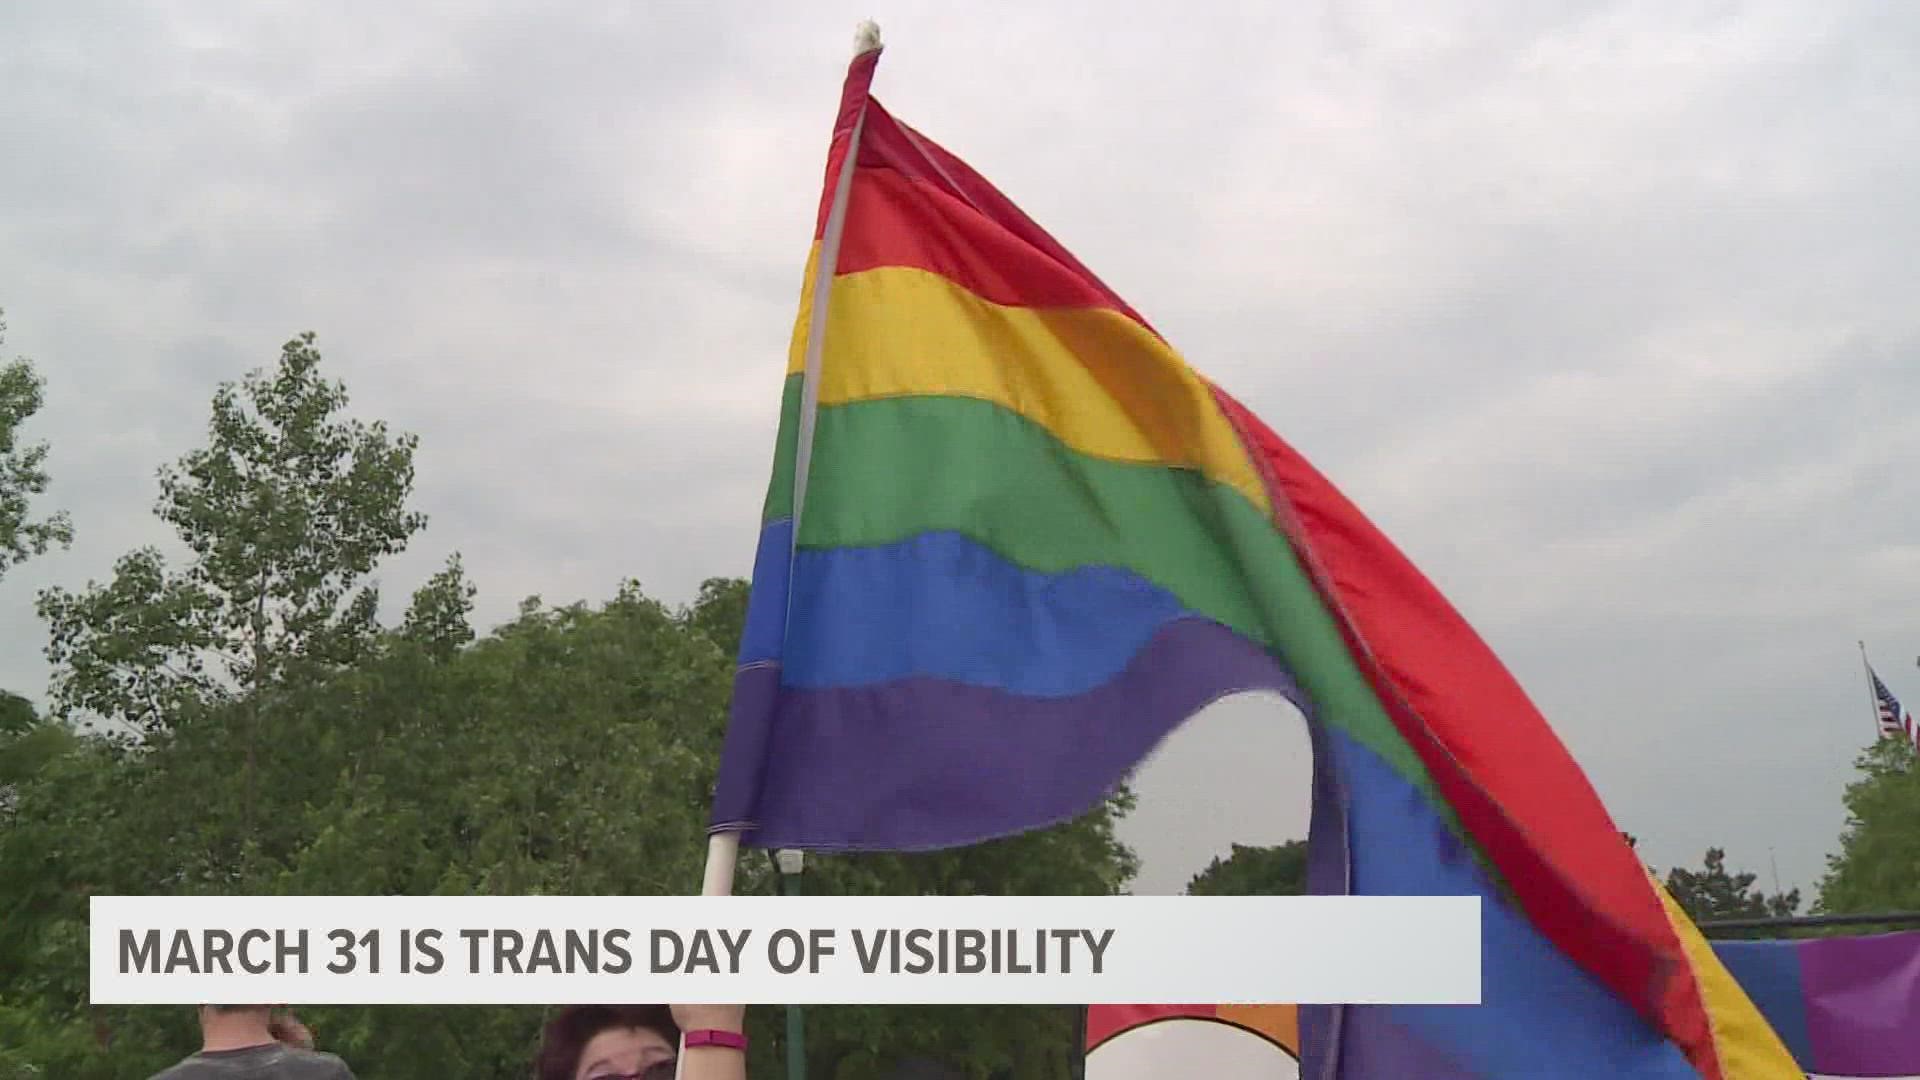 Trans Day of Visibility was established to celebrate and bring visibility to the lives of trans people.